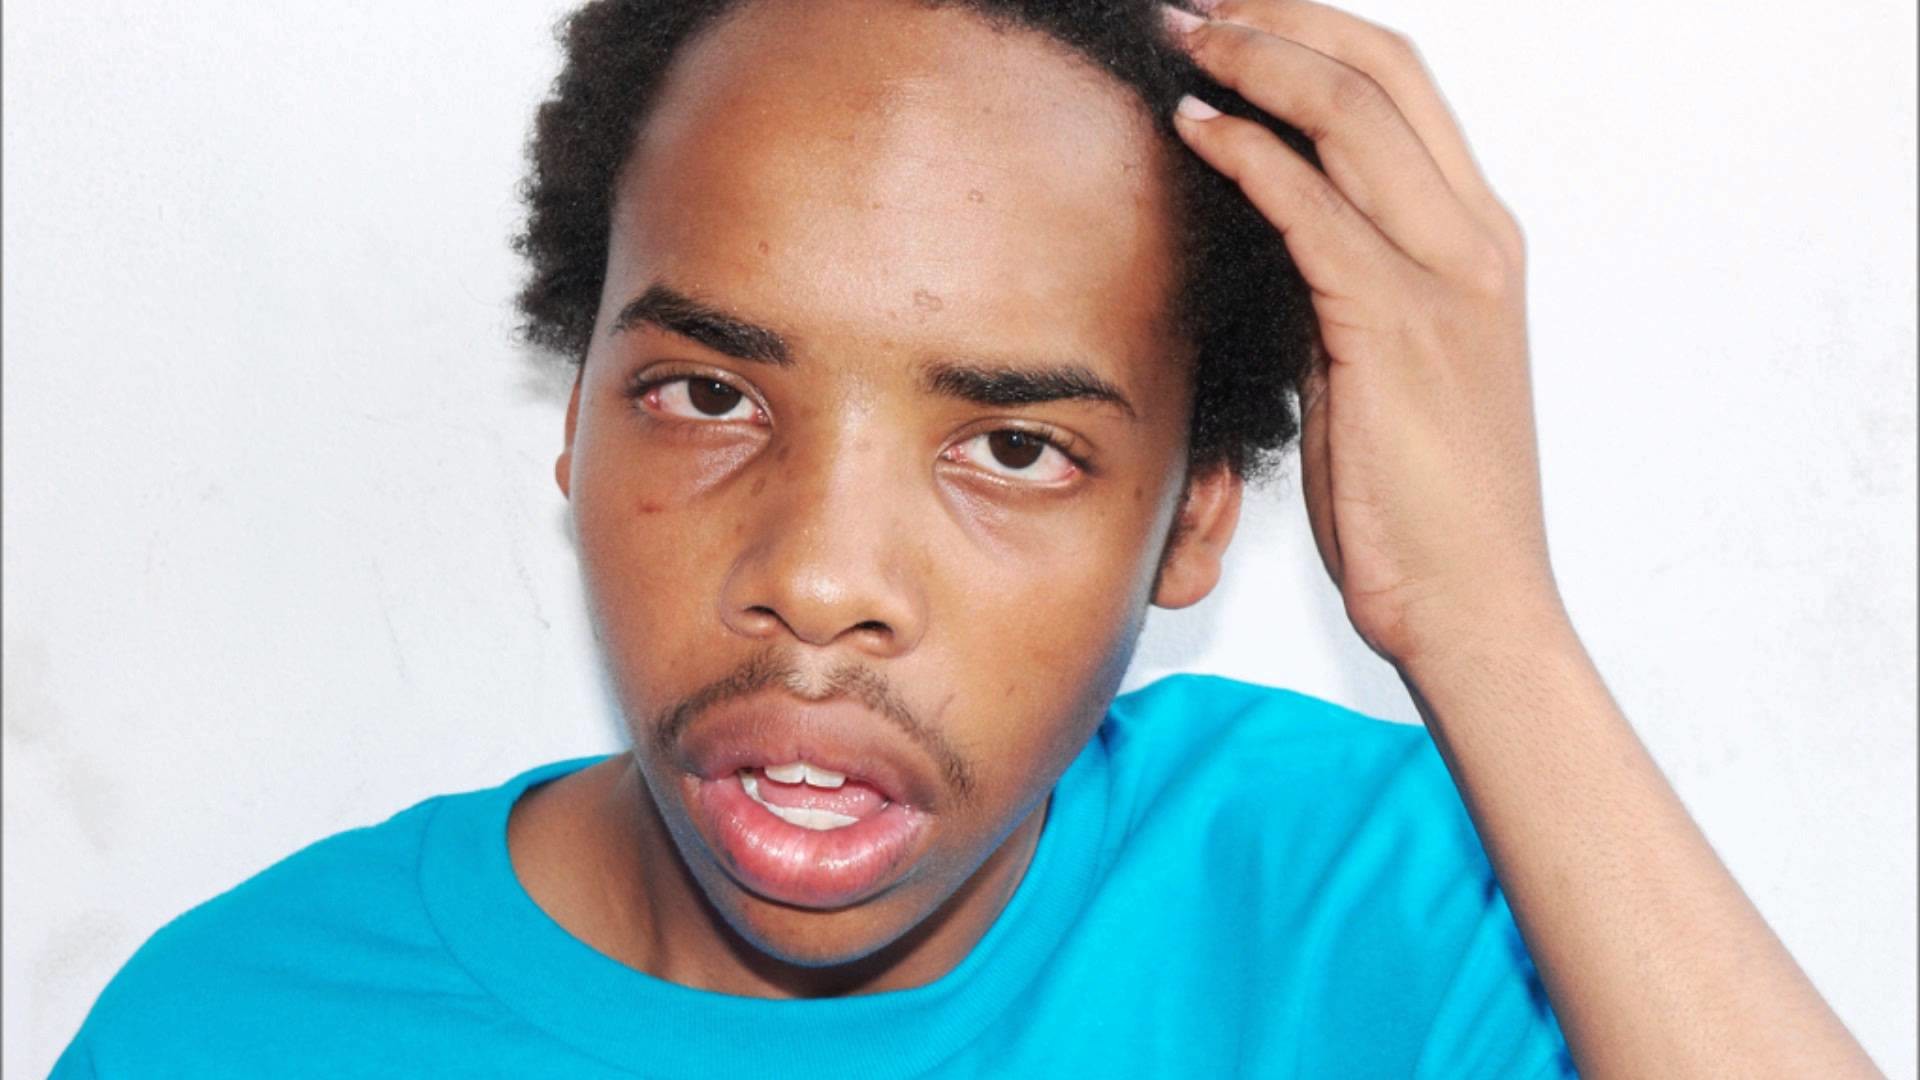 Earl Sweatshirt Dropped 3 New Songs He Produced New Music The Koalition